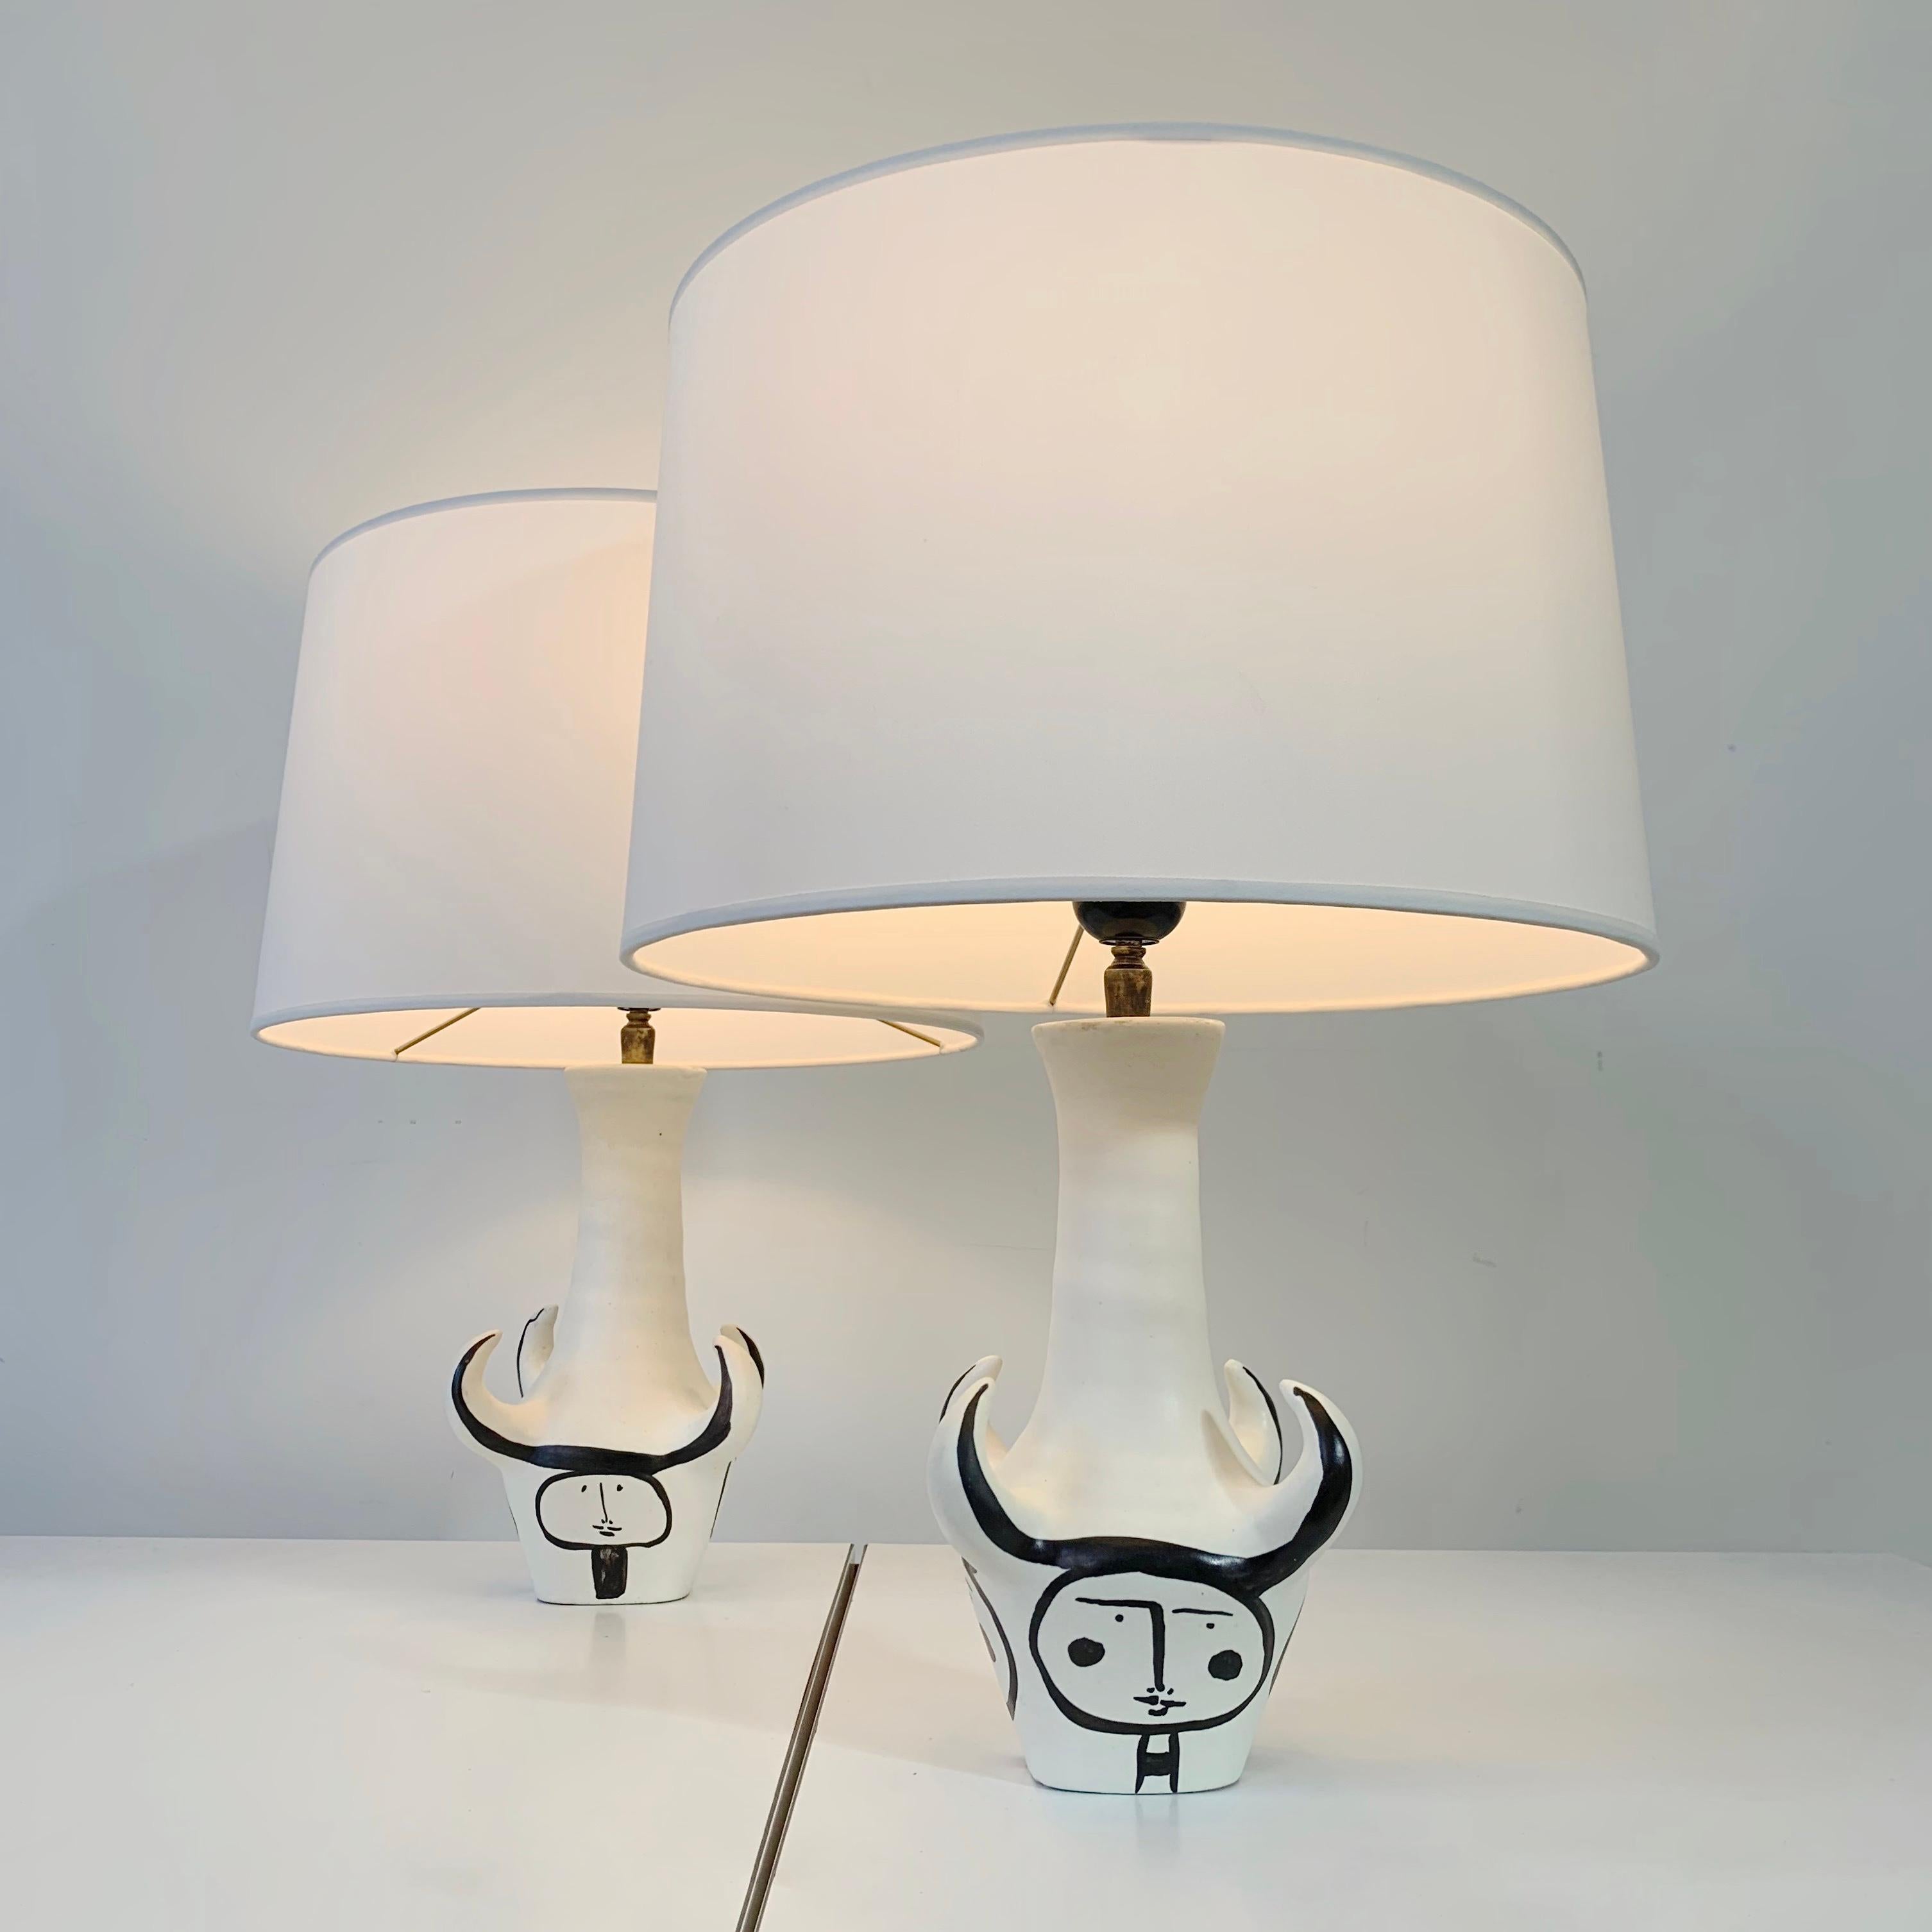  Roger Capron Pair Of 4 Horns Signed Ceramic Table Lamps , circa 1955, France. For Sale 1